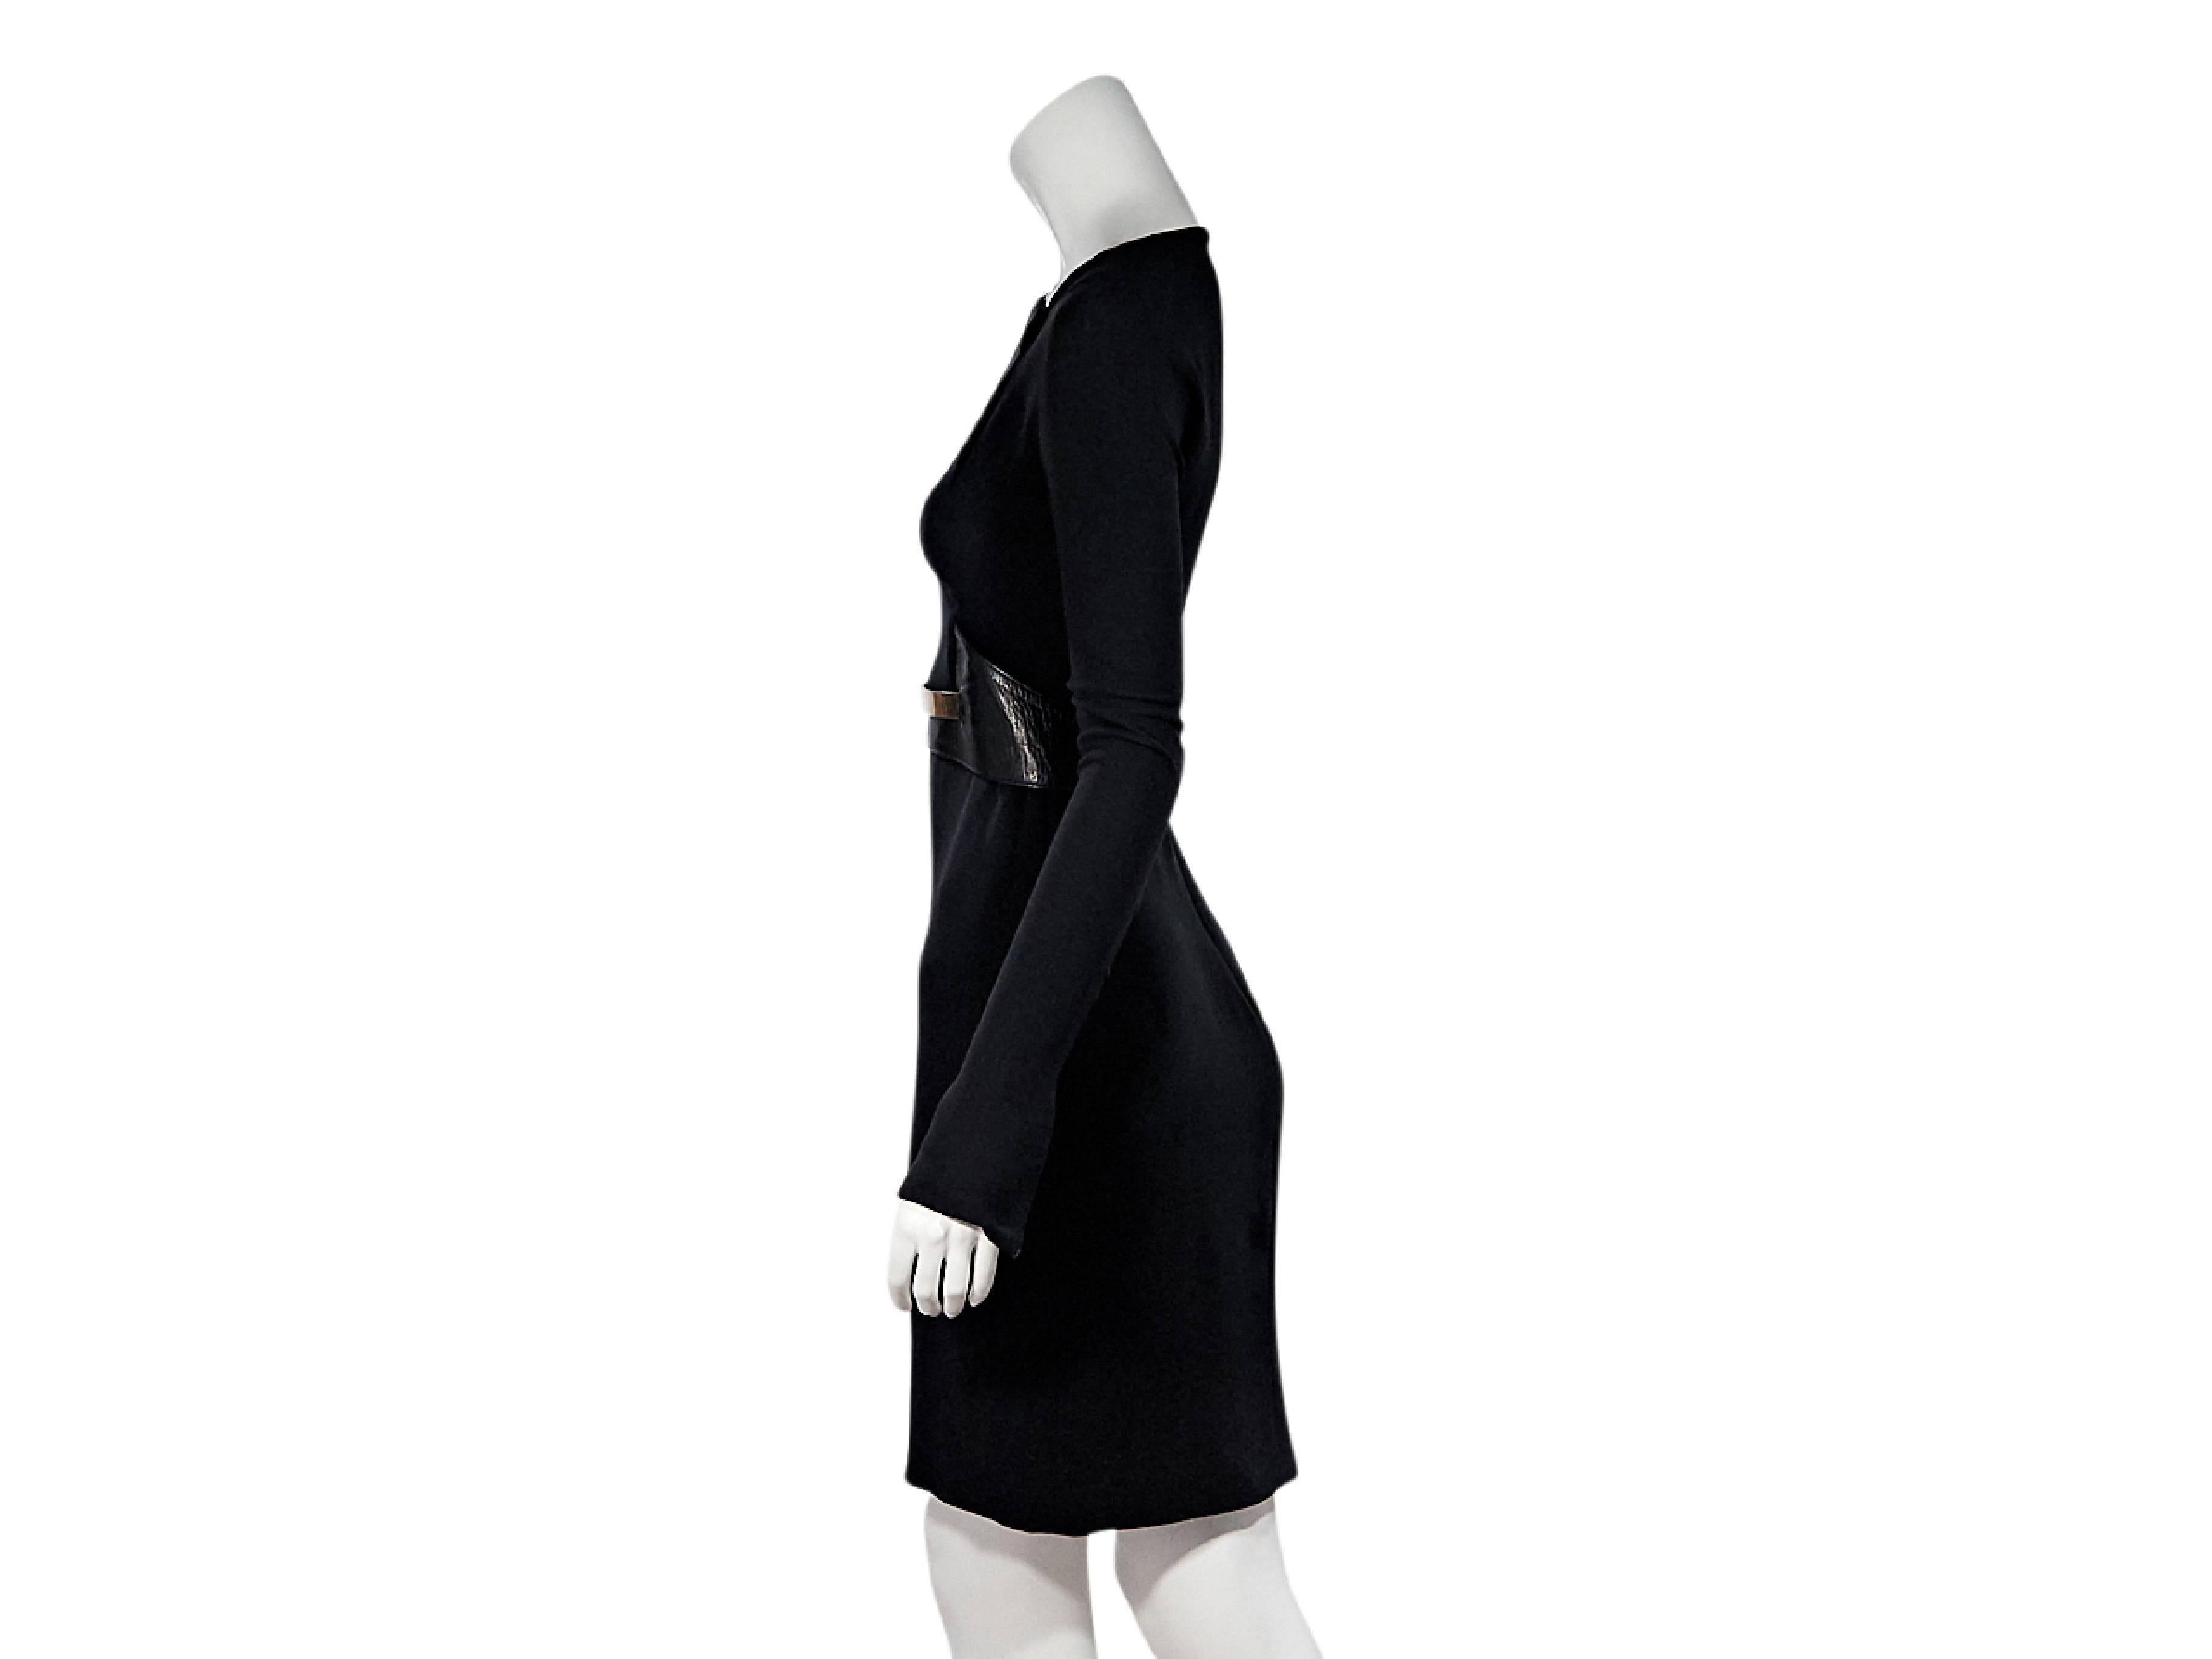 Product details:  Black form-fitting belted dress by Gucci.  Features cutout accents.  Squareneck.  Long sleeves.  Zip cuffs.  Metallic leather belted waist.  Concealed back zip closure.  
Condition: Pre-owned. Very good.  
Est. Retail $ 978.00